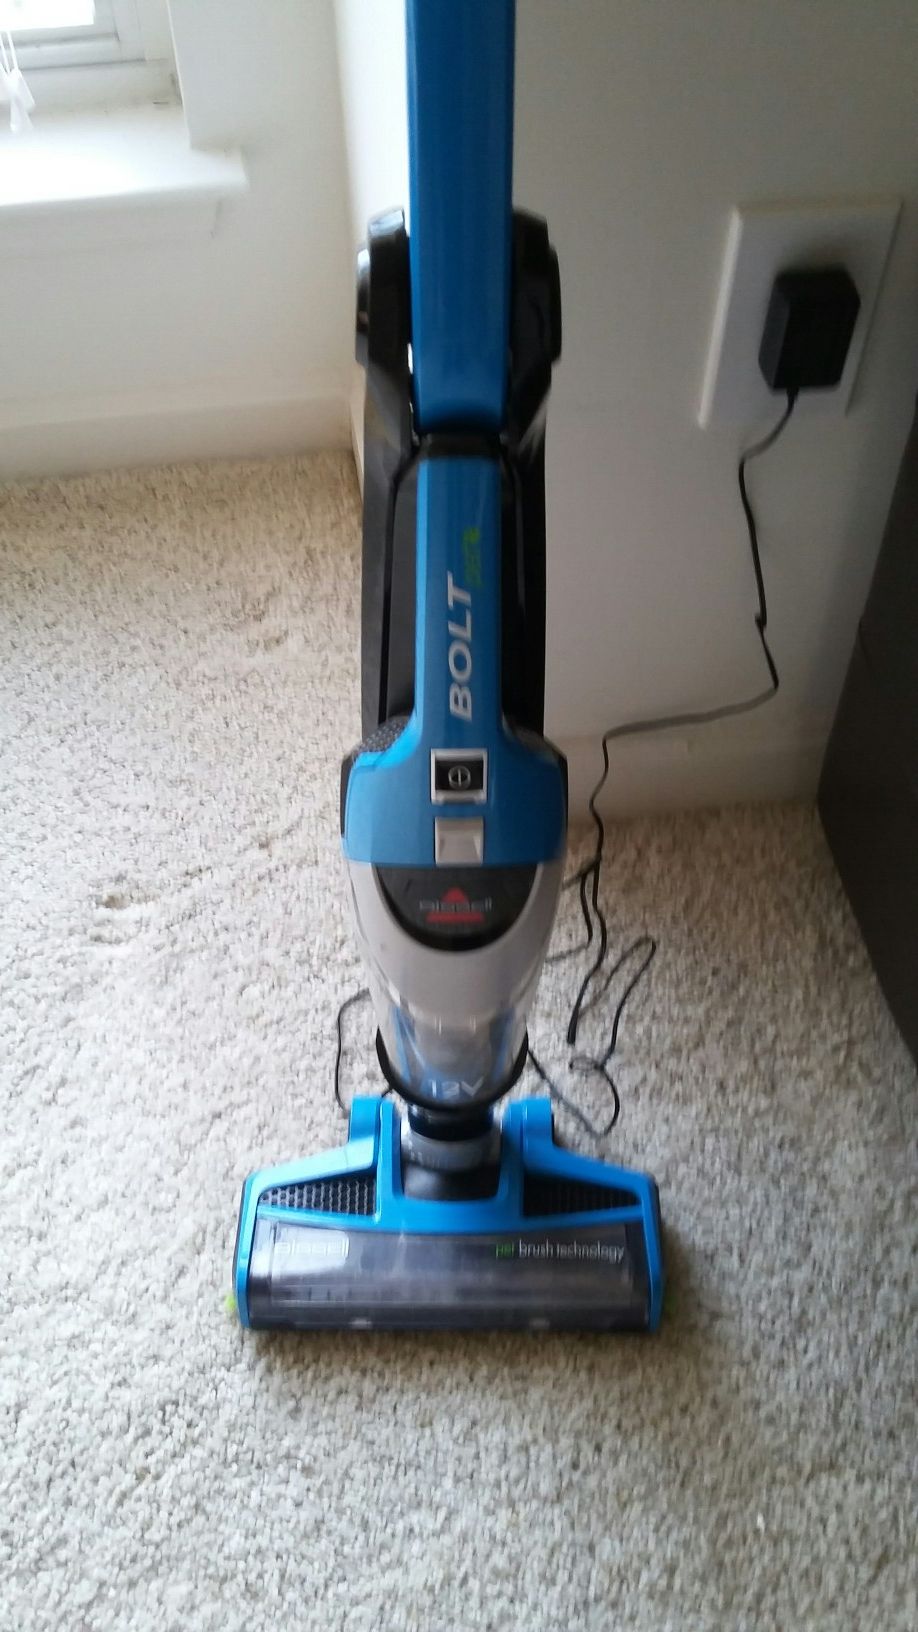 BISSELL Bolt 12V . 2 in 1 powerful cleaning vacuum with swivel head and lights on it for cleaning corners Real Cost $150 . Good For Home or Car.